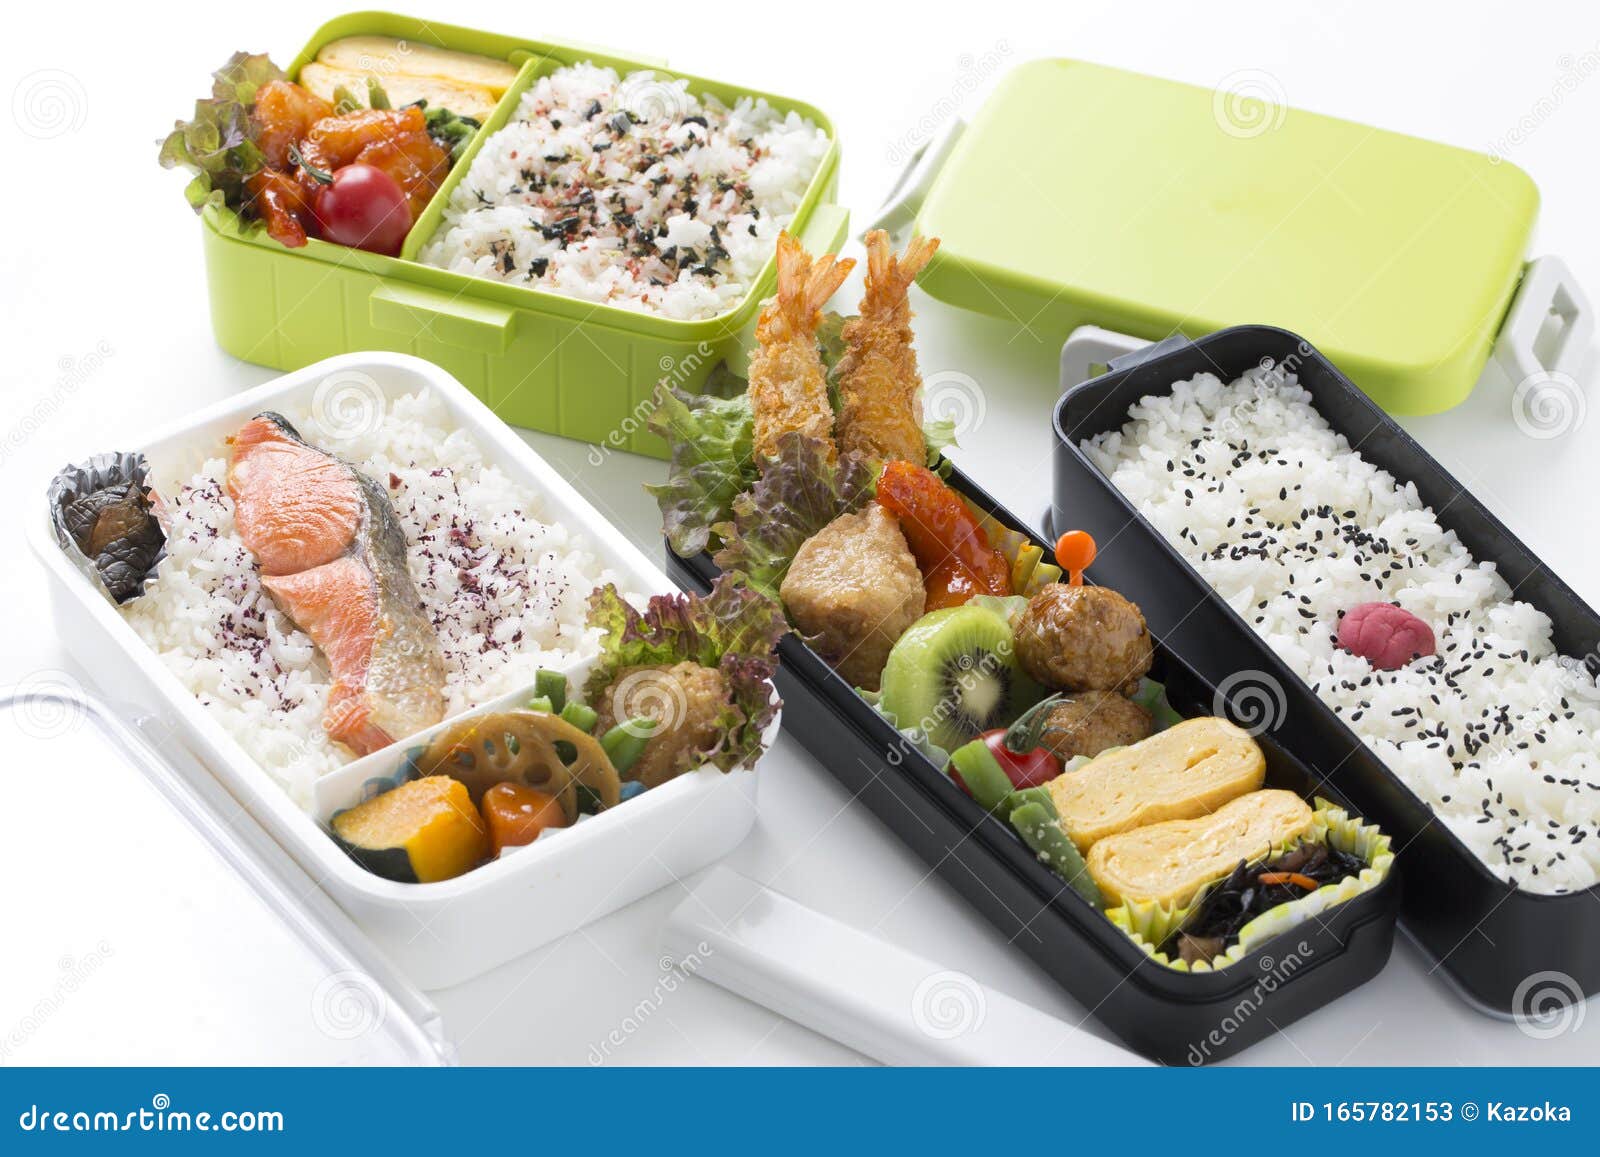 https://thumbs.dreamstime.com/z/japanese-bento-well-balanced-meal-adult-images-165782153.jpg